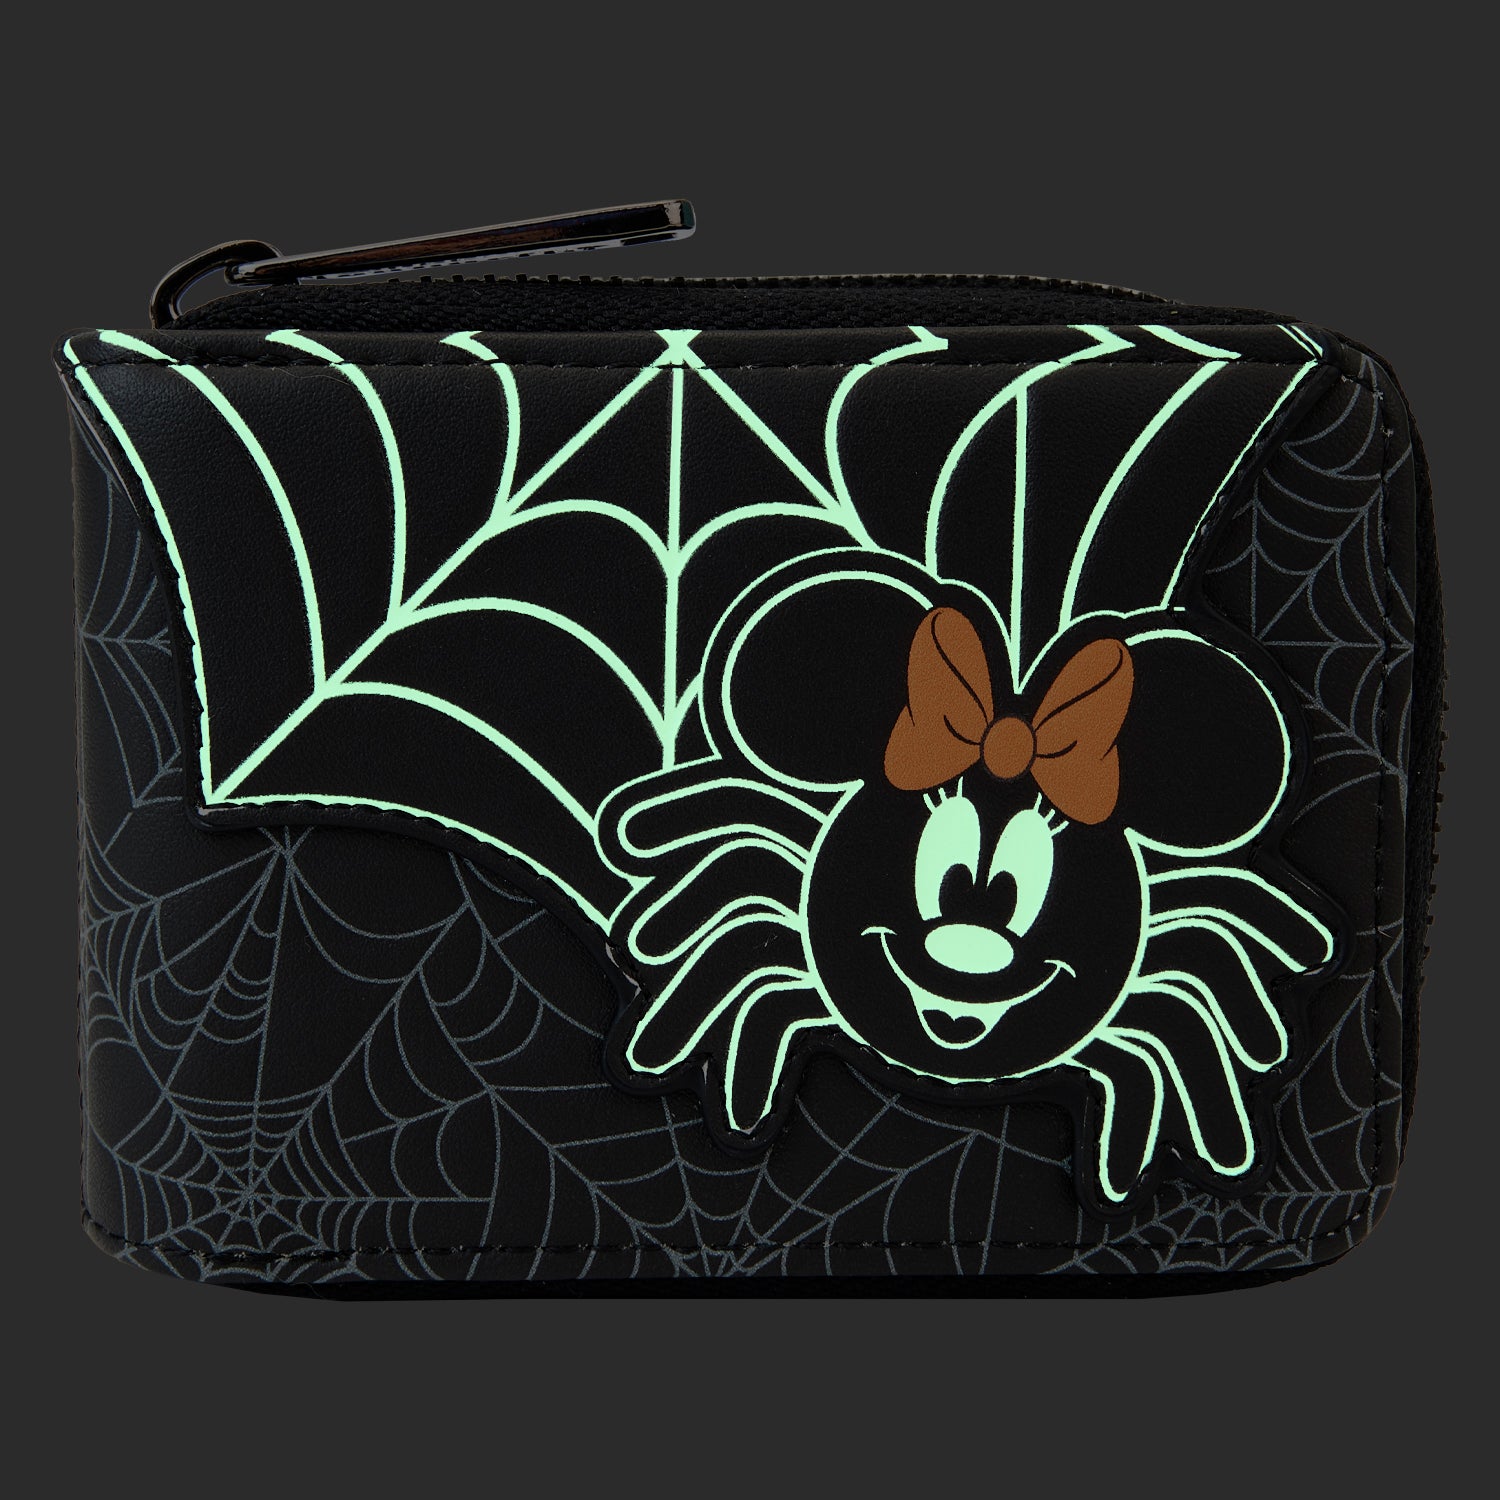 Loungefly x Disney Minnie Mouse Spider Accordion Wallet